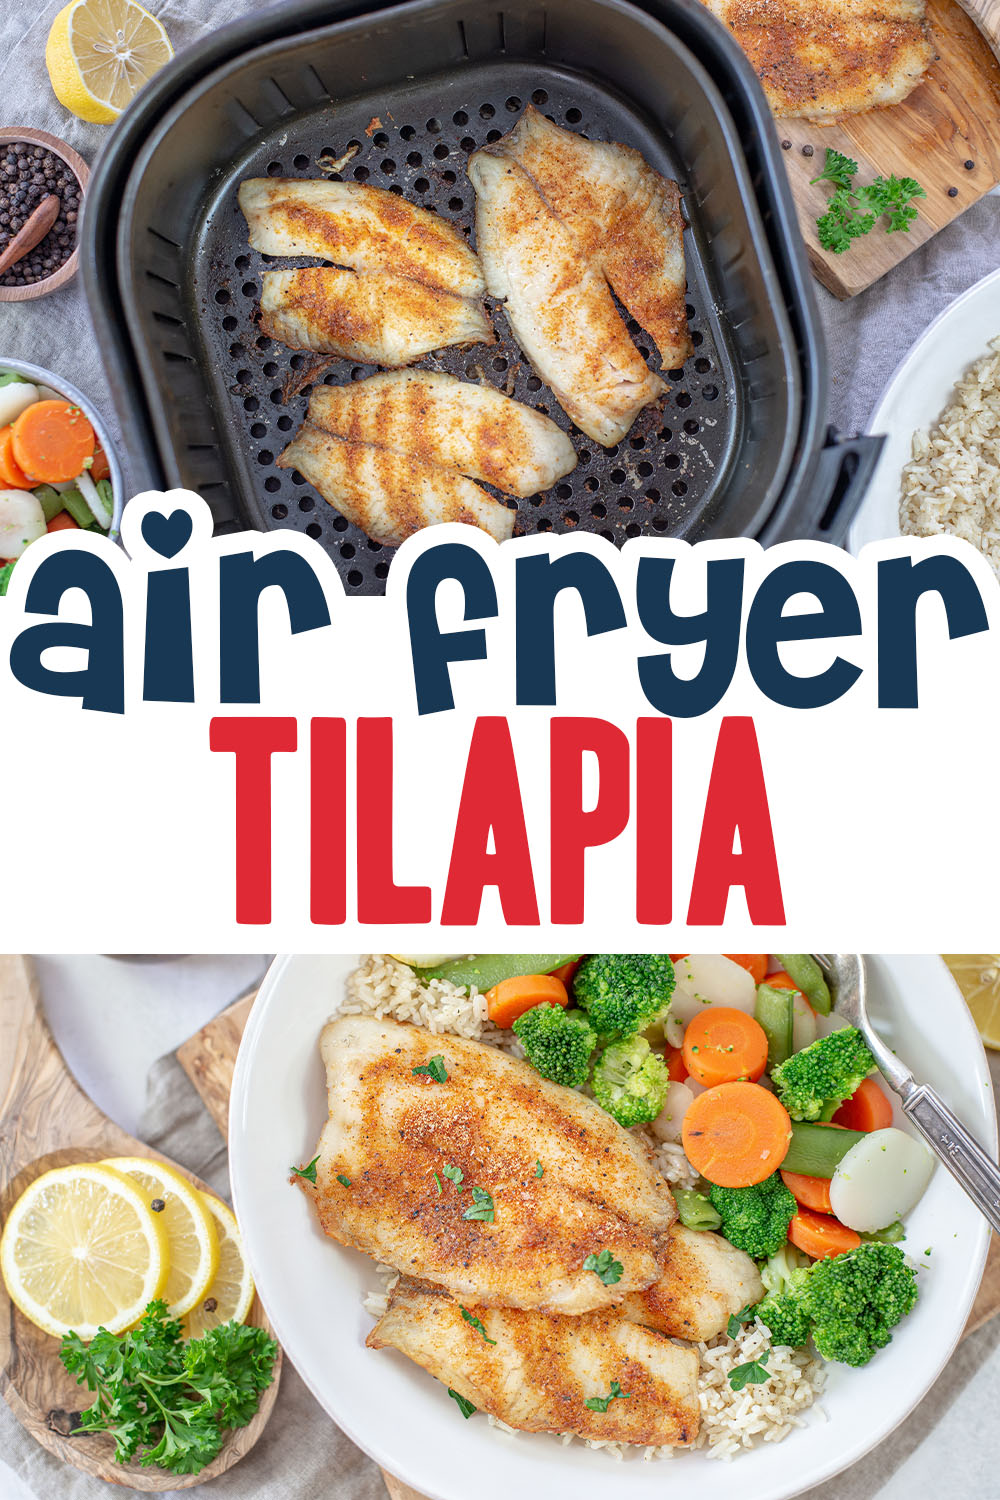 This tilapia was seasoned so well and cooked perfectly in an air fryer.  It is a great pairing with rice or a side of veggies!